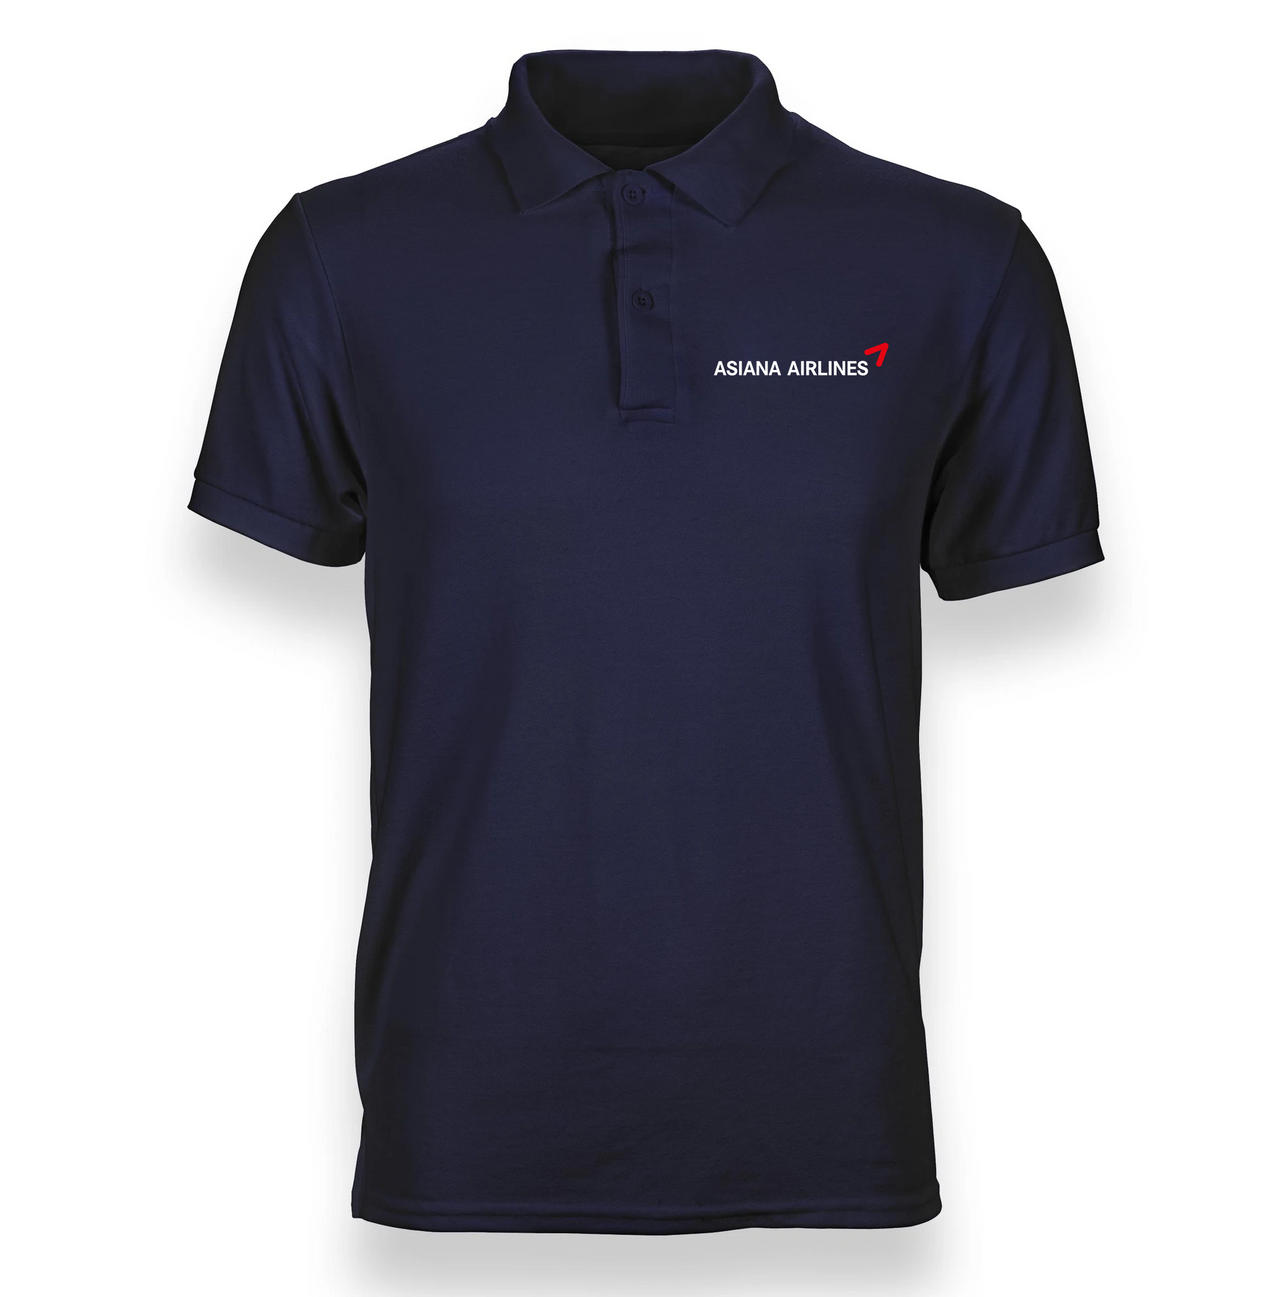 ASIA AIRLINES POLO T-SHIRT